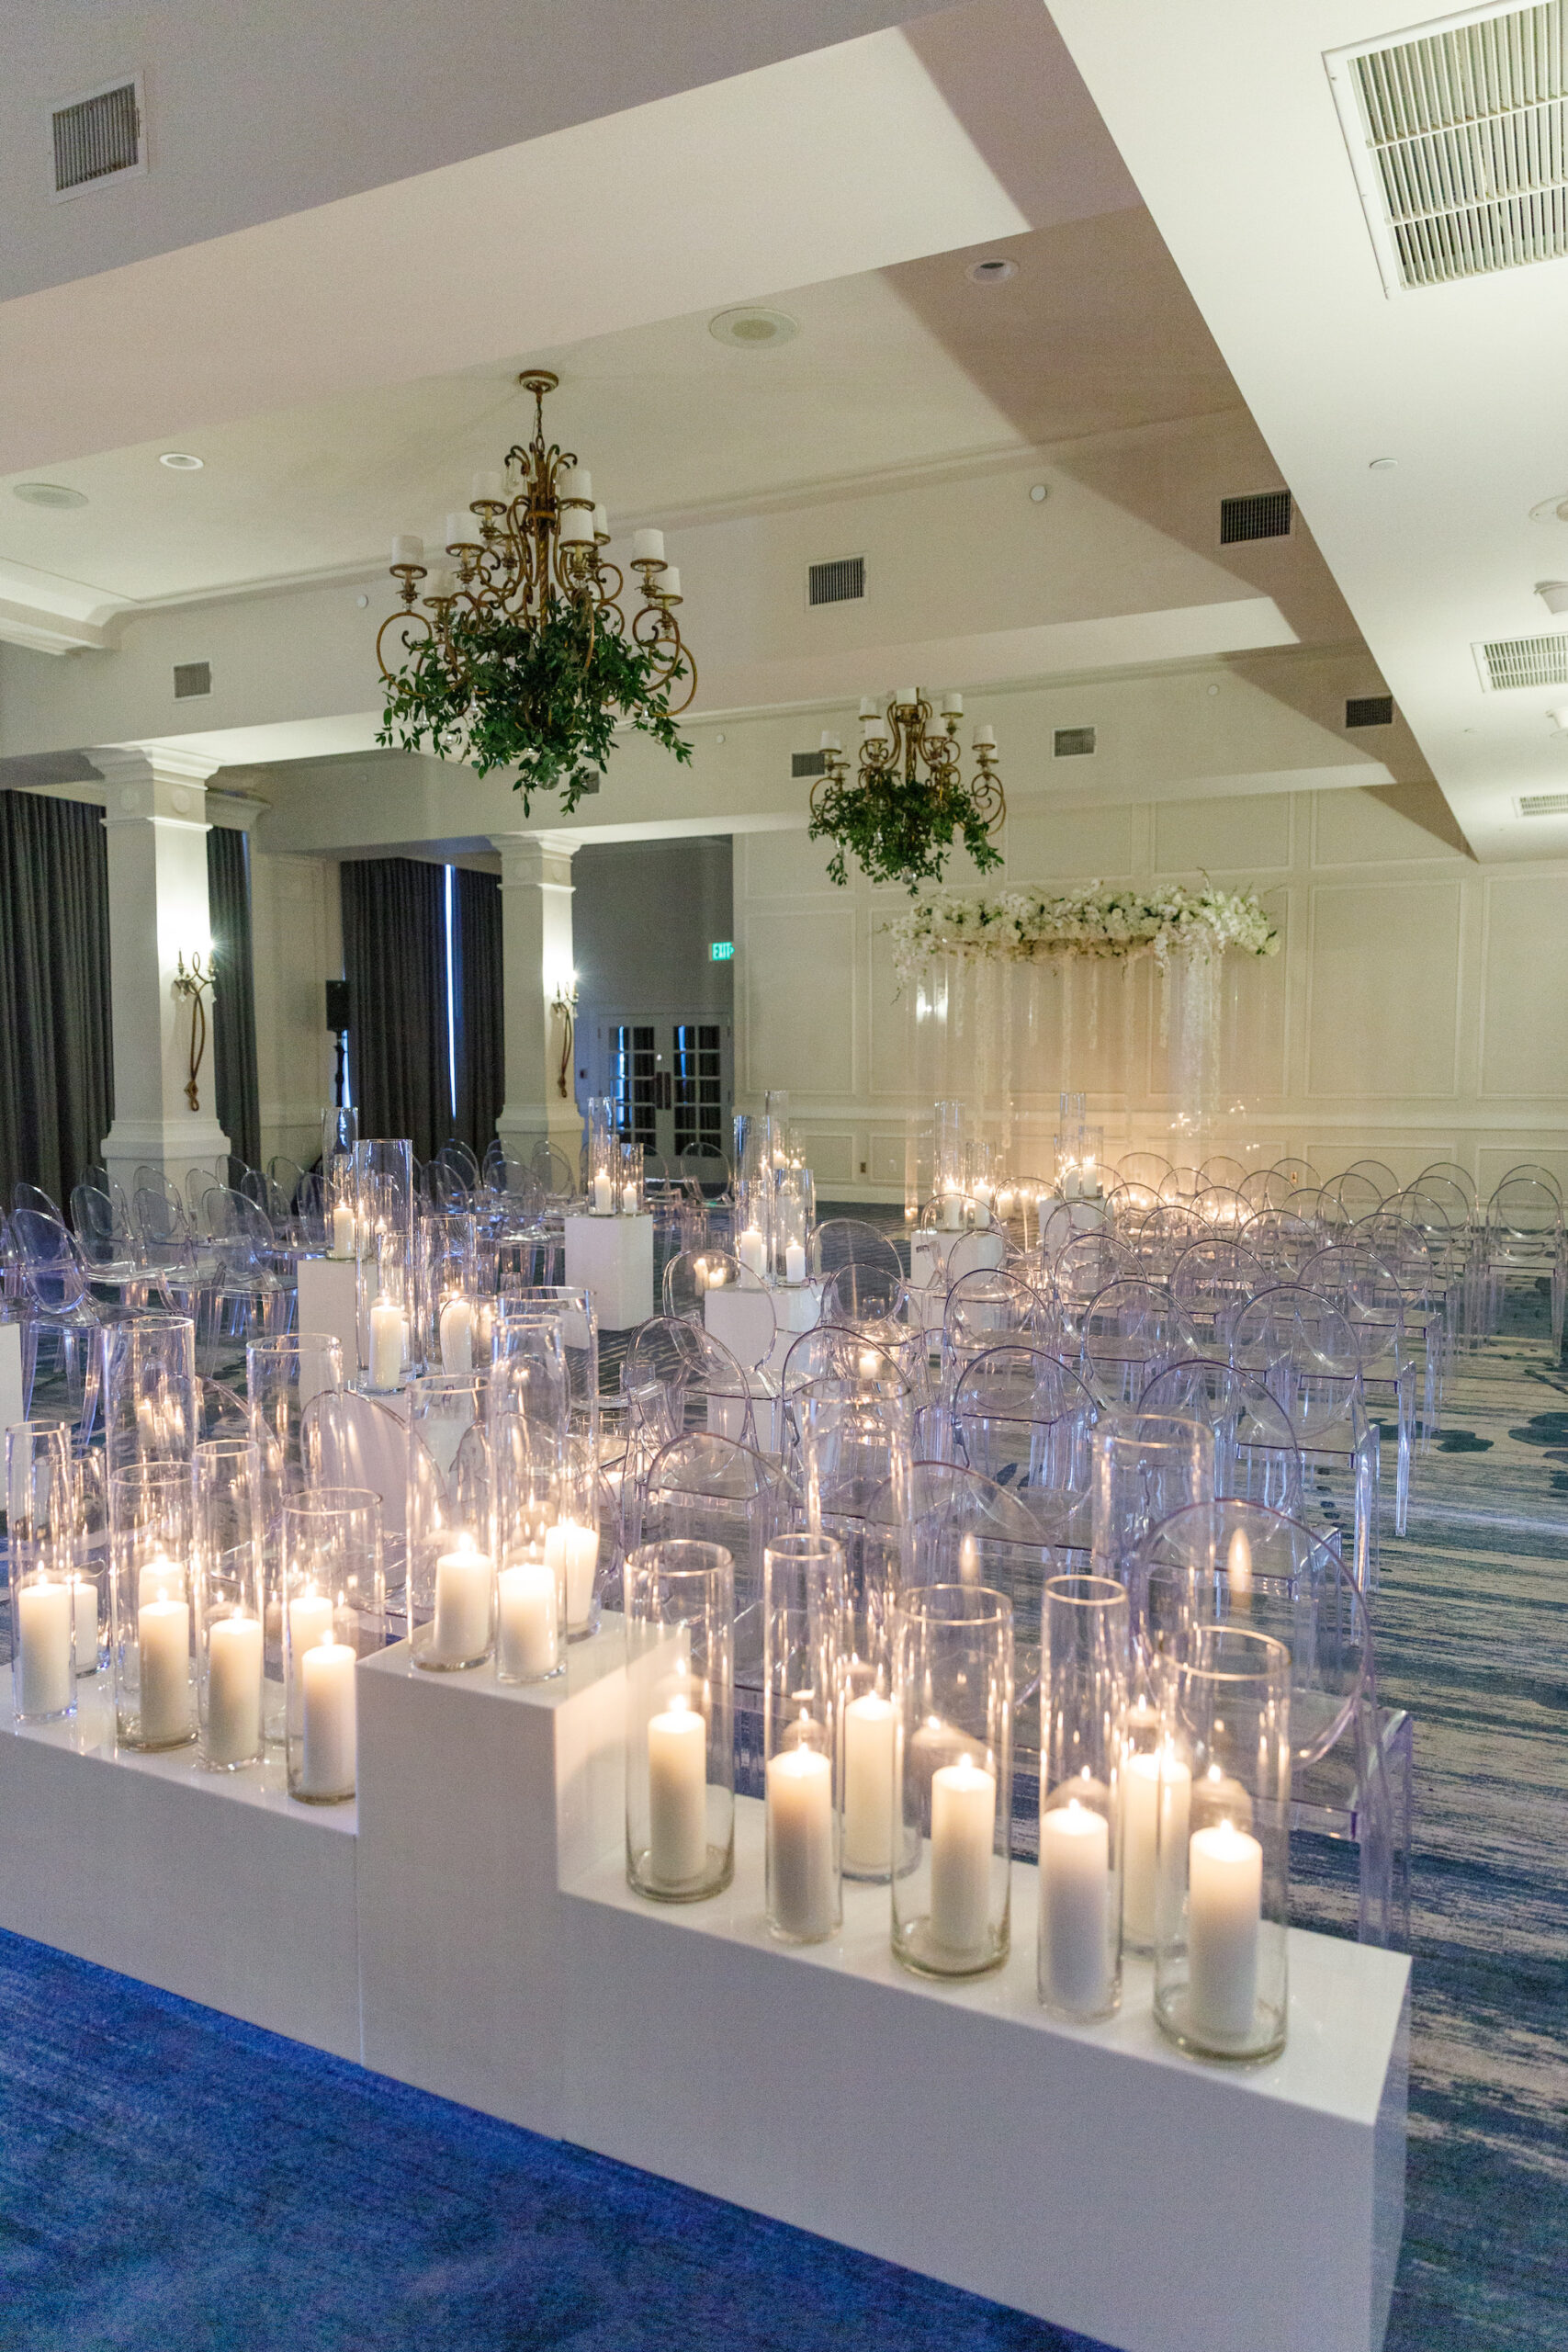 Modern Timeless Candlelit Wedding Aisle Ceremony Decor | White Pillar Candles | Ghost Acrylic Chairs Seating Inspiration | Buena Vista Ballroom Wedding Ceremony at St Pete Venue Don CeSar